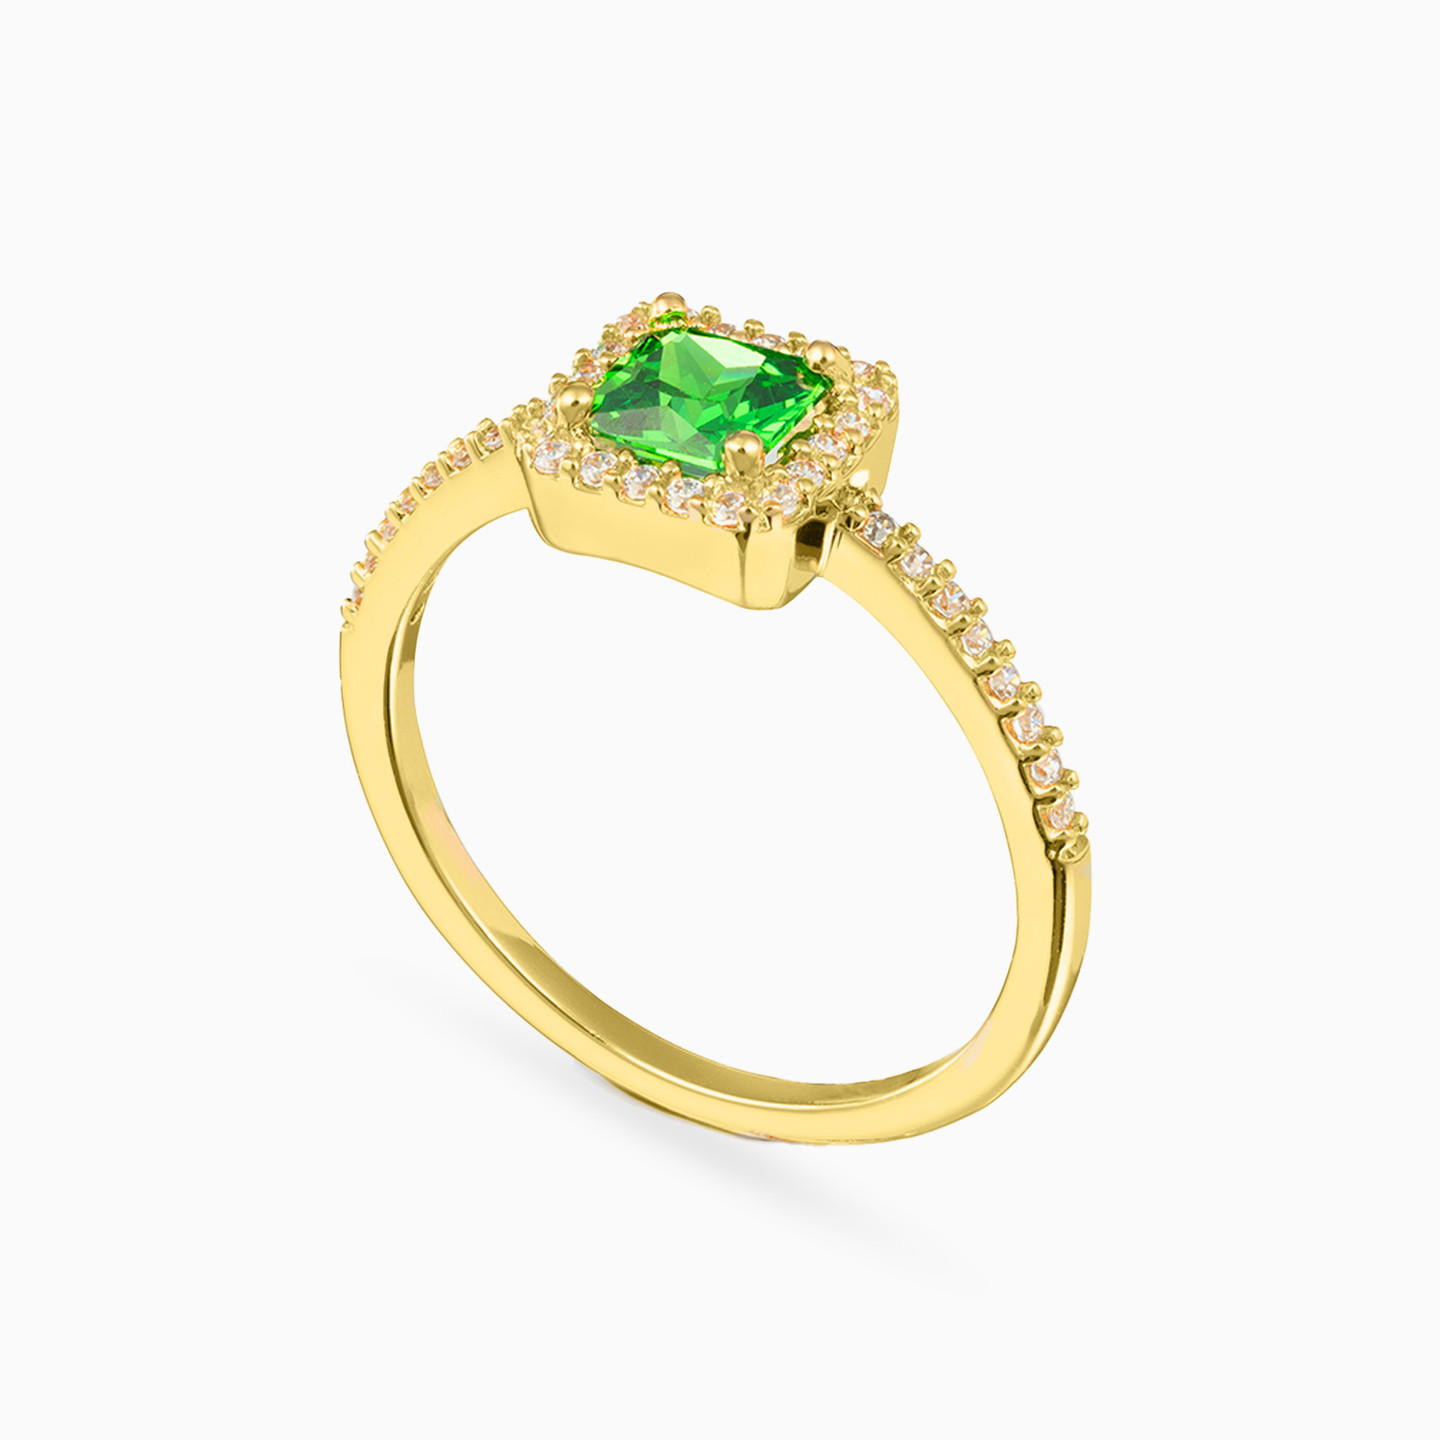  Gold Plated Square Shaped Colored Stones Statement Ring - 2